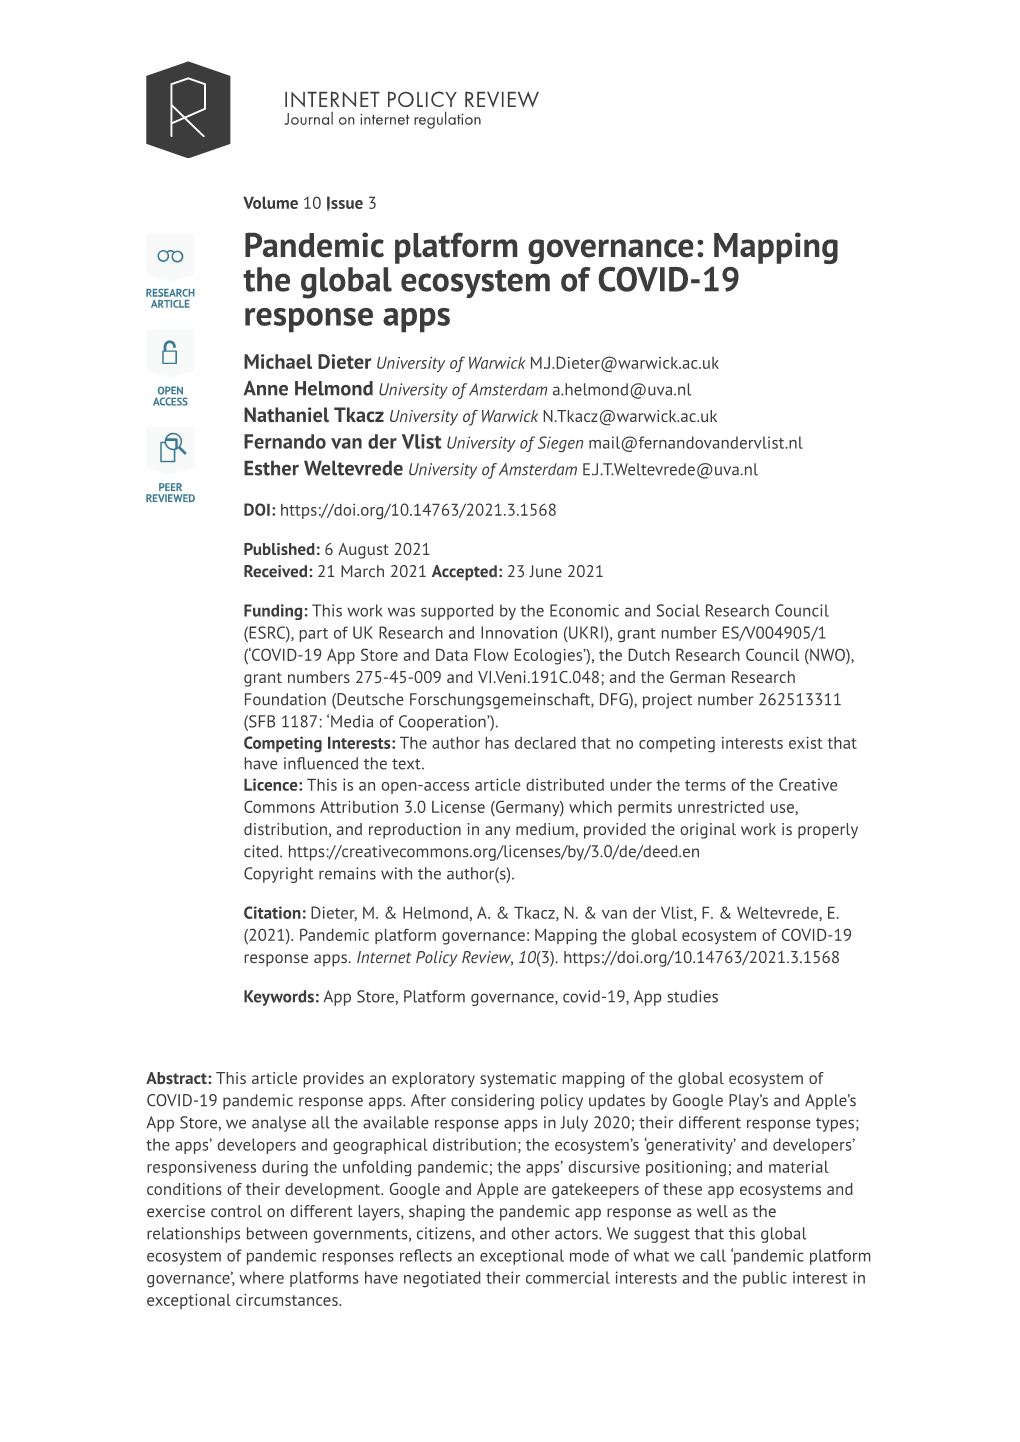 Pandemic Platform Governance: Mapping the Global Ecosystem of COVID-19 Response Apps